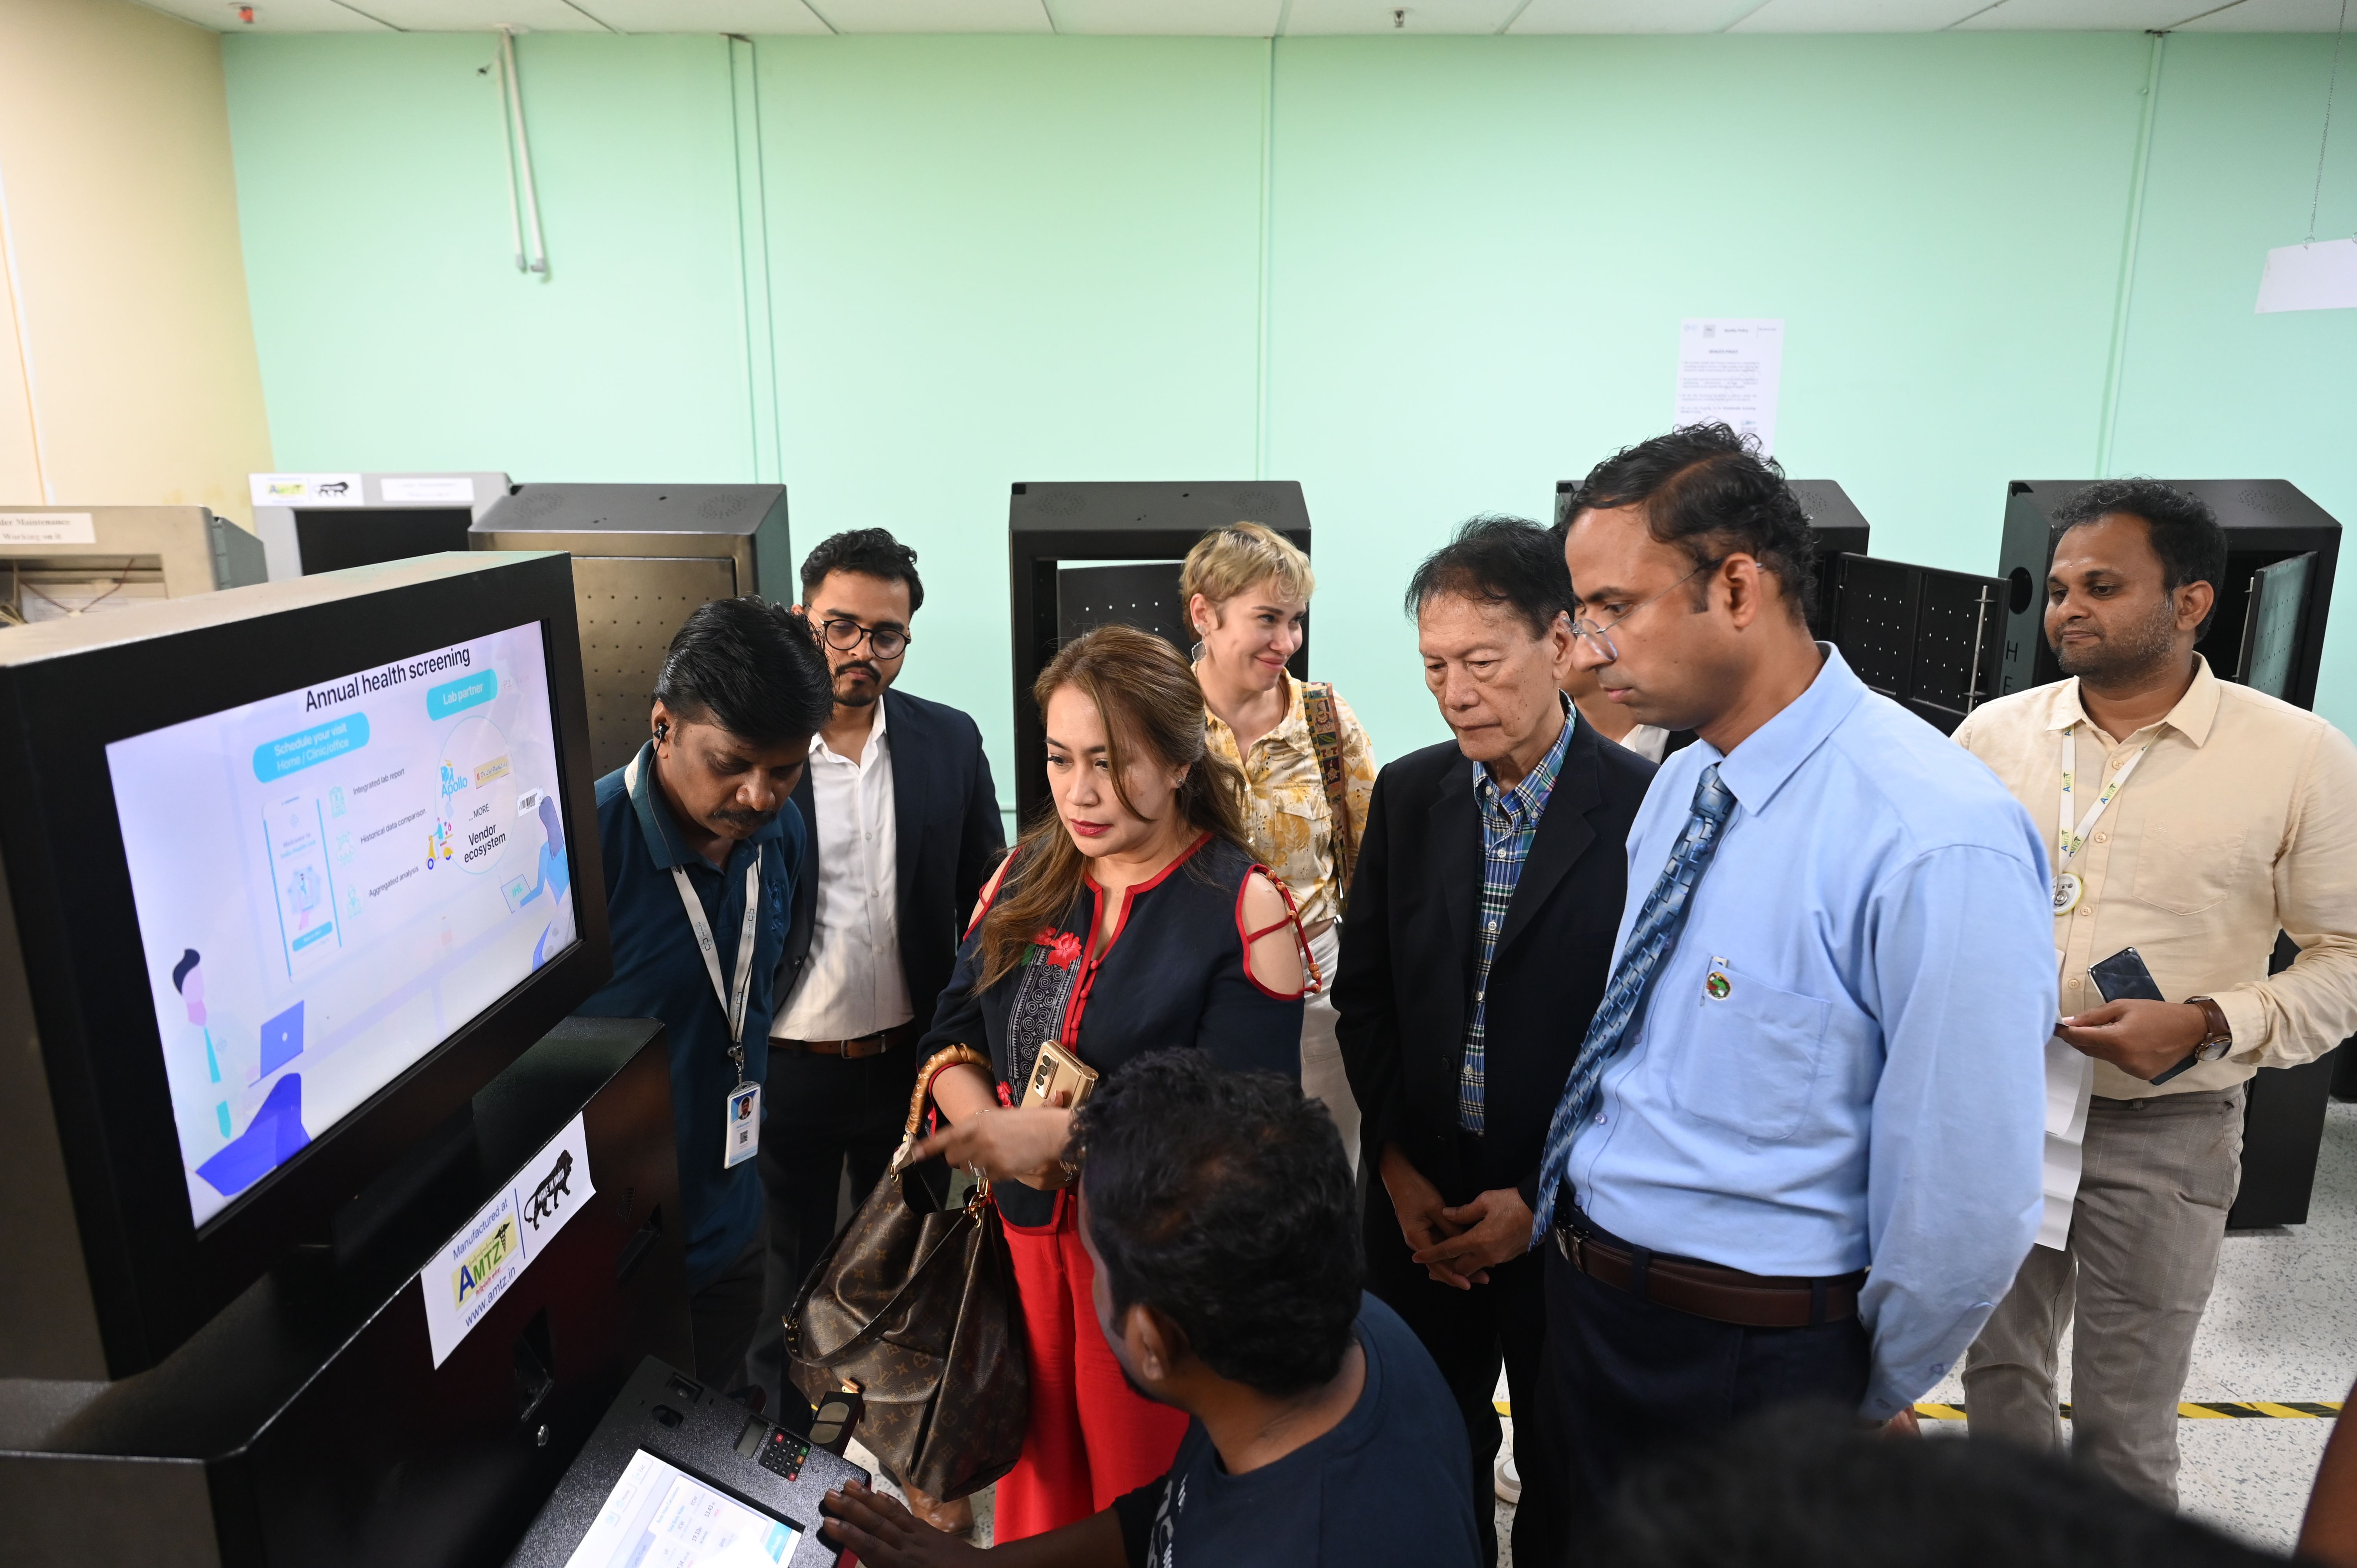 Hon'ble Roberto Pagdanganan, former Governor of Bulacan Philippines visited and met Dr Jitendra Sharma at AMTZ Health Care Technology and Medical Technology in India